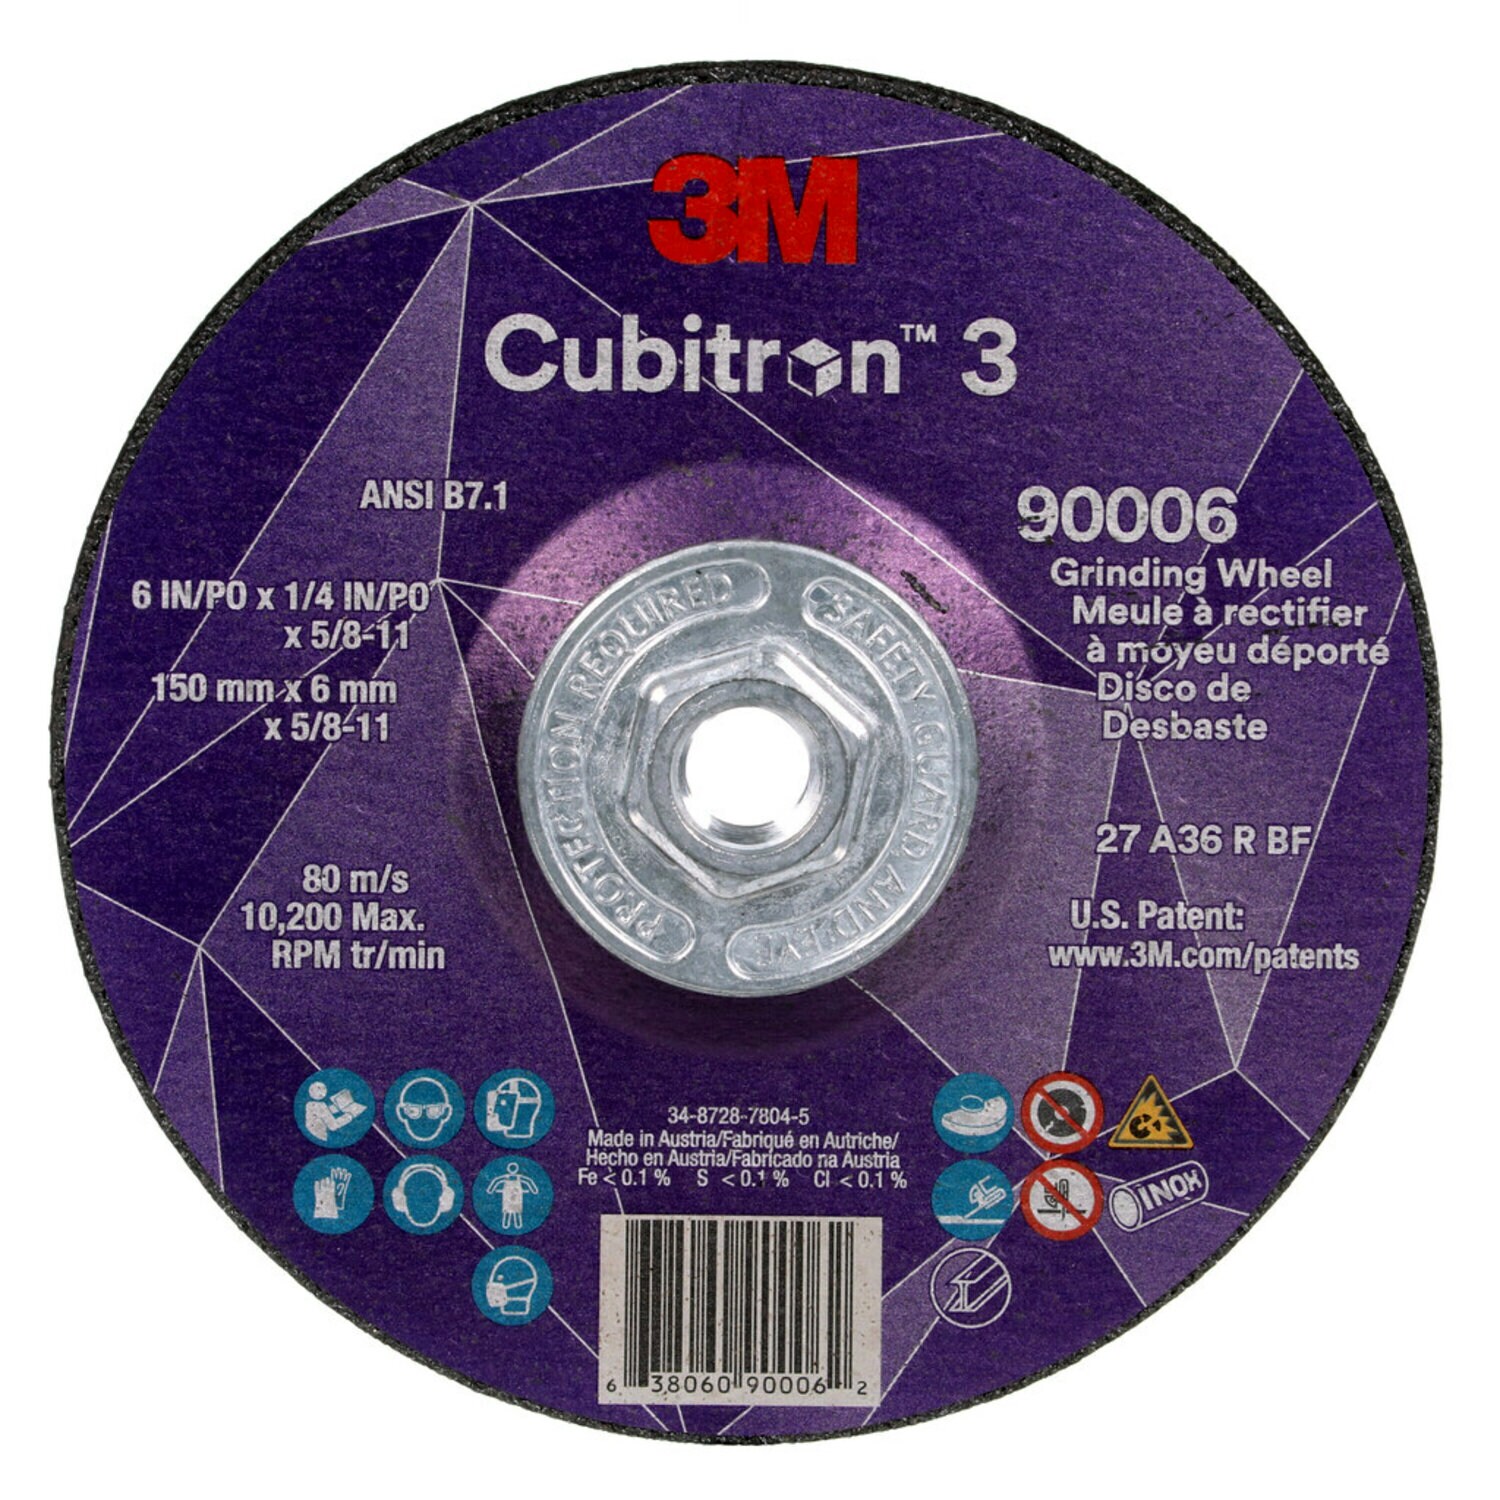 7100312966 - 3M Cubitron 3 Depressed Center Grinding Wheel, 90006, 36+, T27, 6 in x
1/4 in x 5/8 in-11 (150x6mmx5/8-11in), ANSI, 10 ea/Case